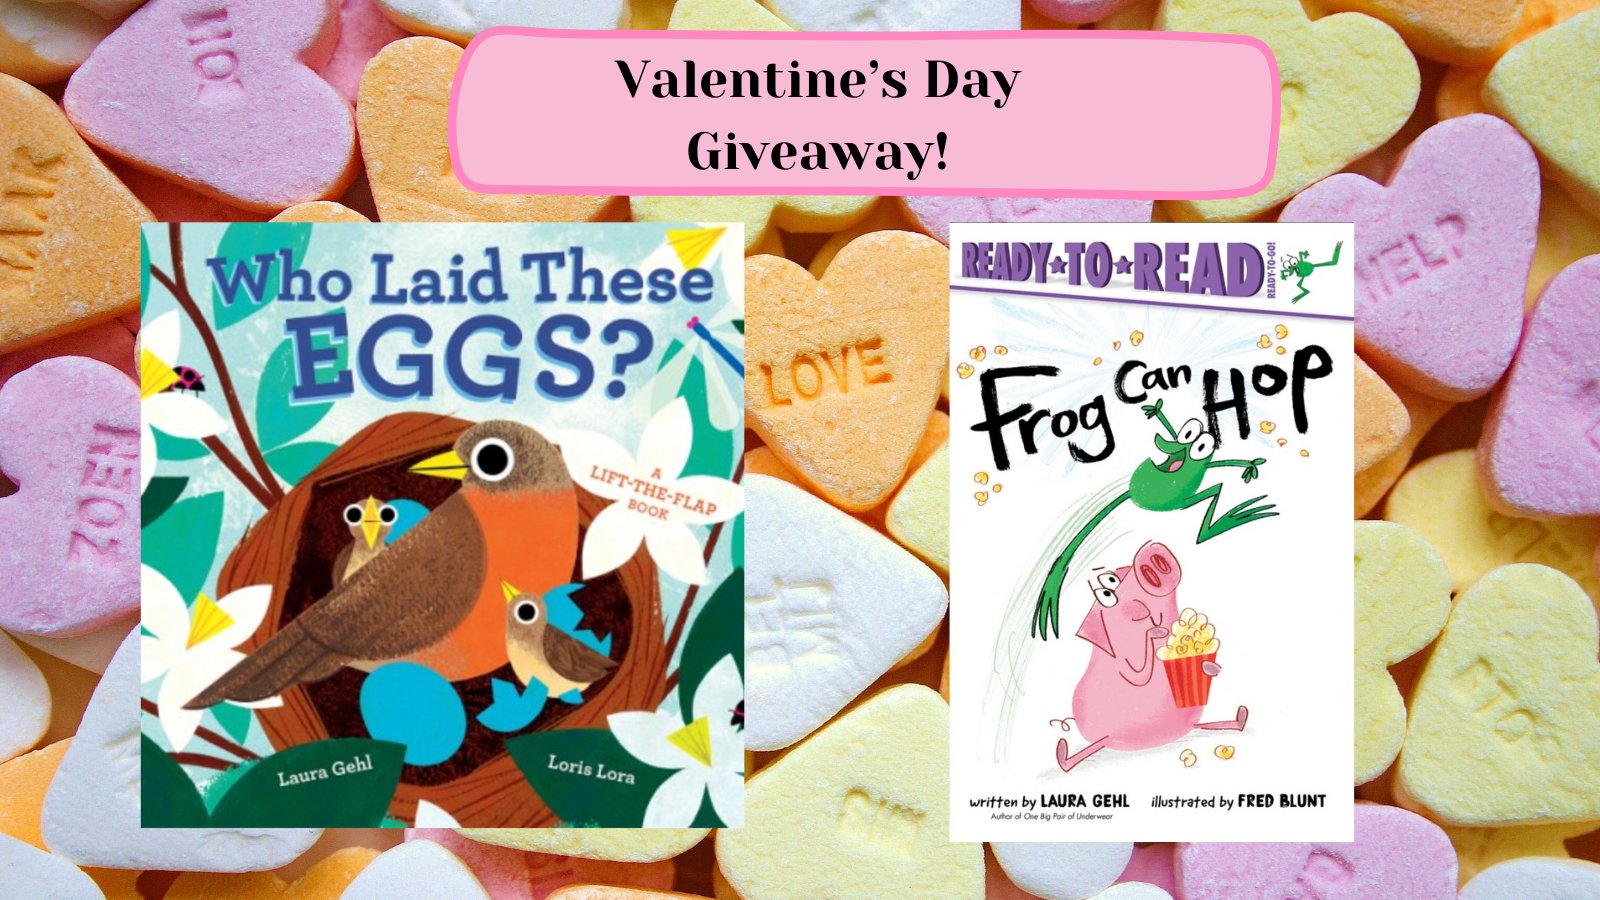 Laura Gehl on X: Happy Valentine's Day! Last day to enter this giveaway!  / X